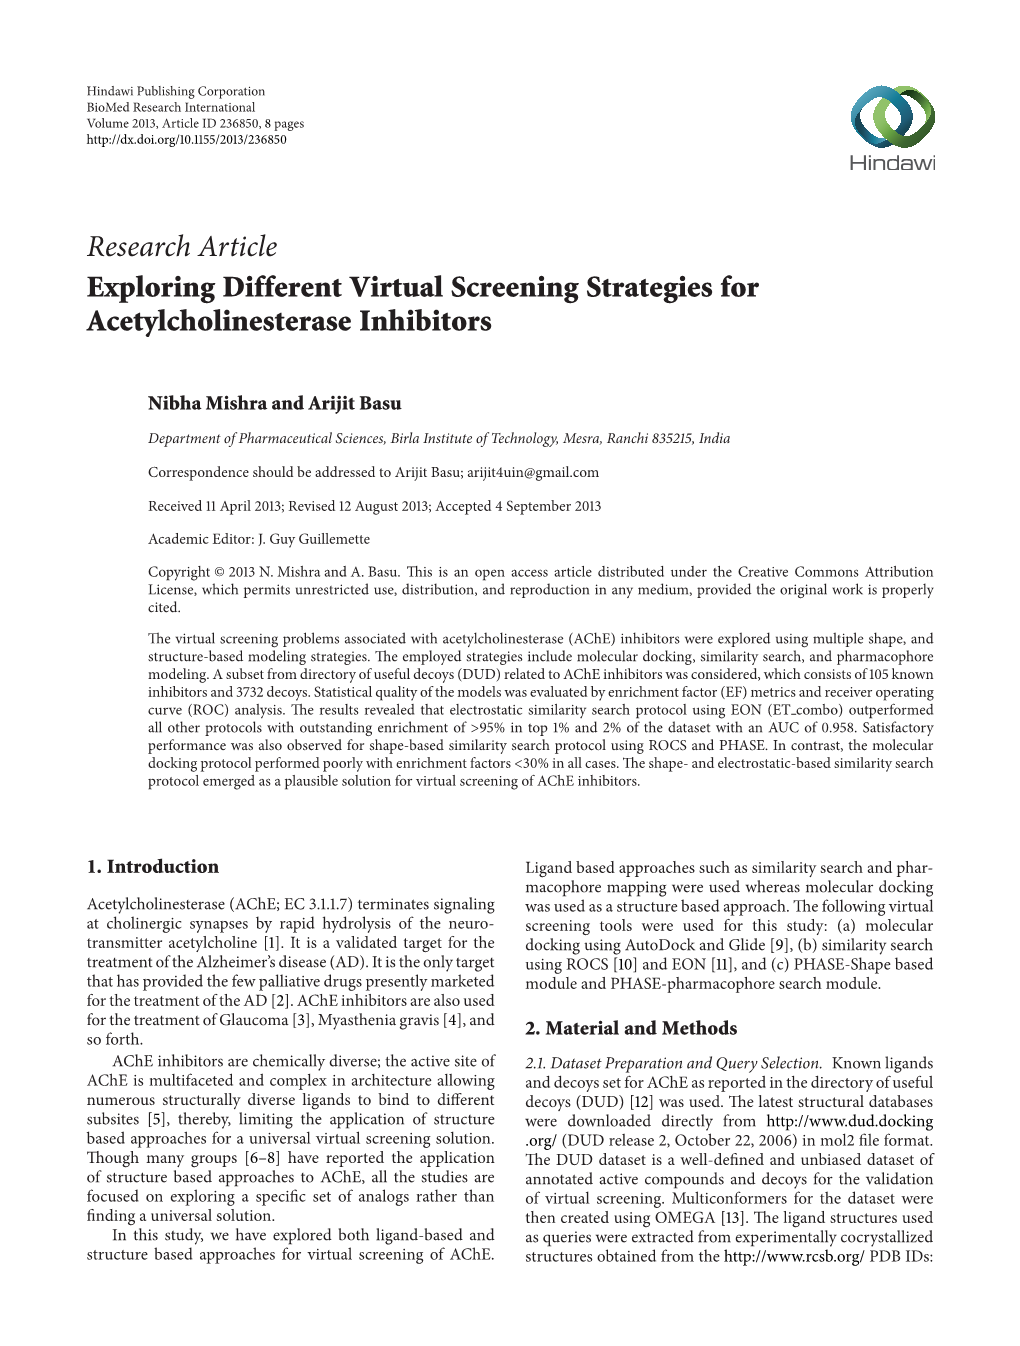 Exploring Different Virtual Screening Strategies for Acetylcholinesterase Inhibitors